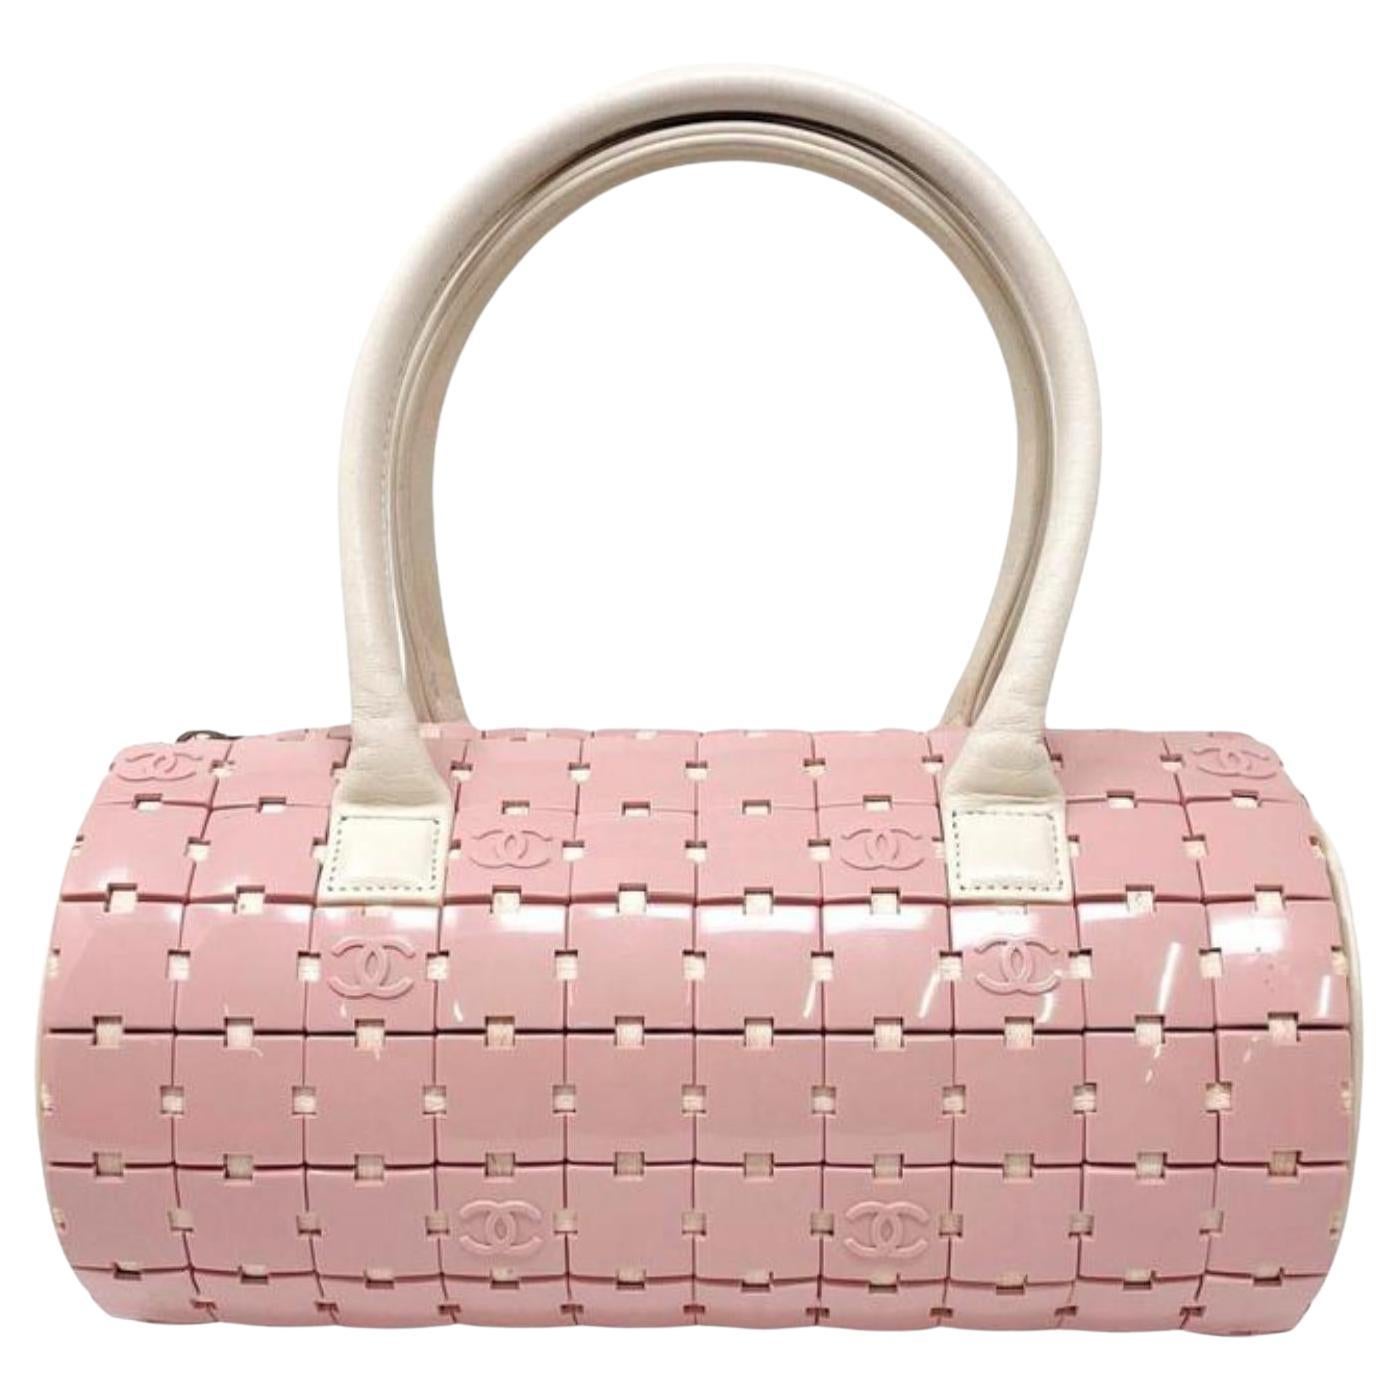 CHANEL, Bags, Chanel 26 Iridescent Blush Rose Pink Leather Flap Bag Purse  Ruthenium Hardware